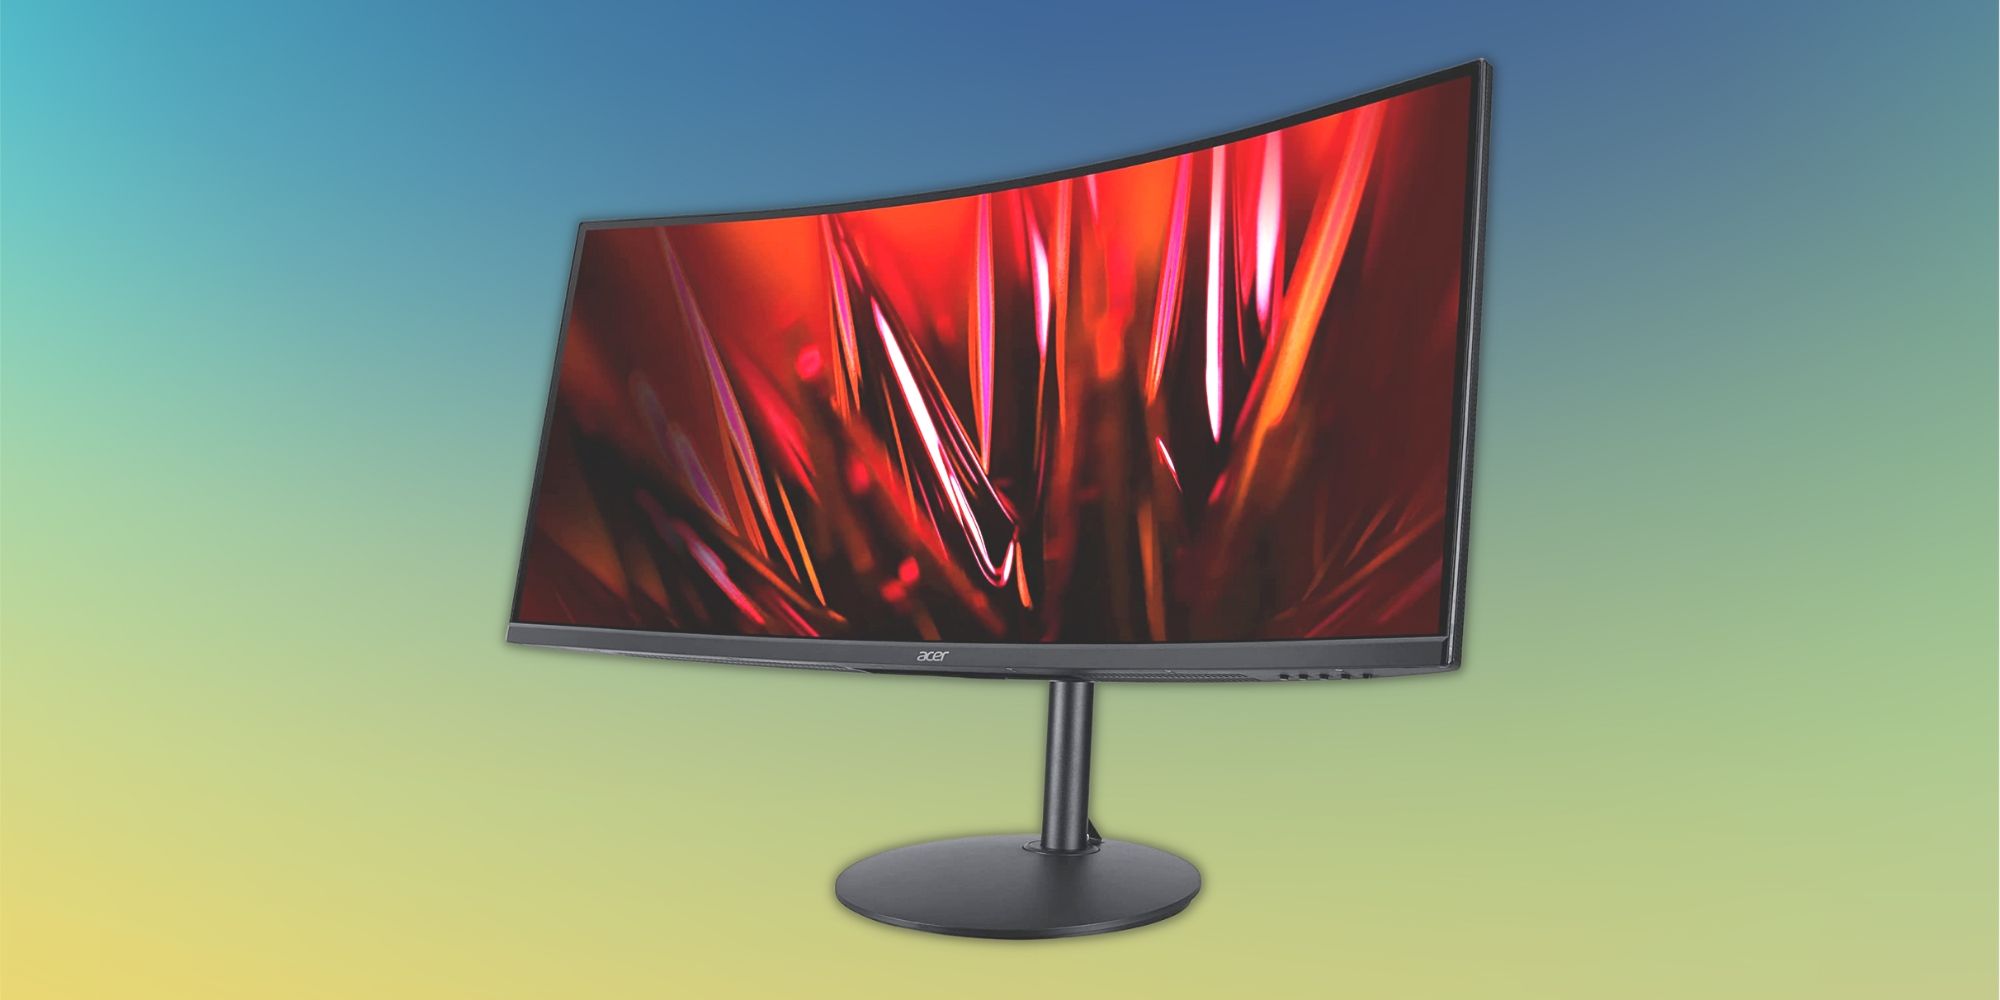 34-inch Acer Nitro curved gaming monitor